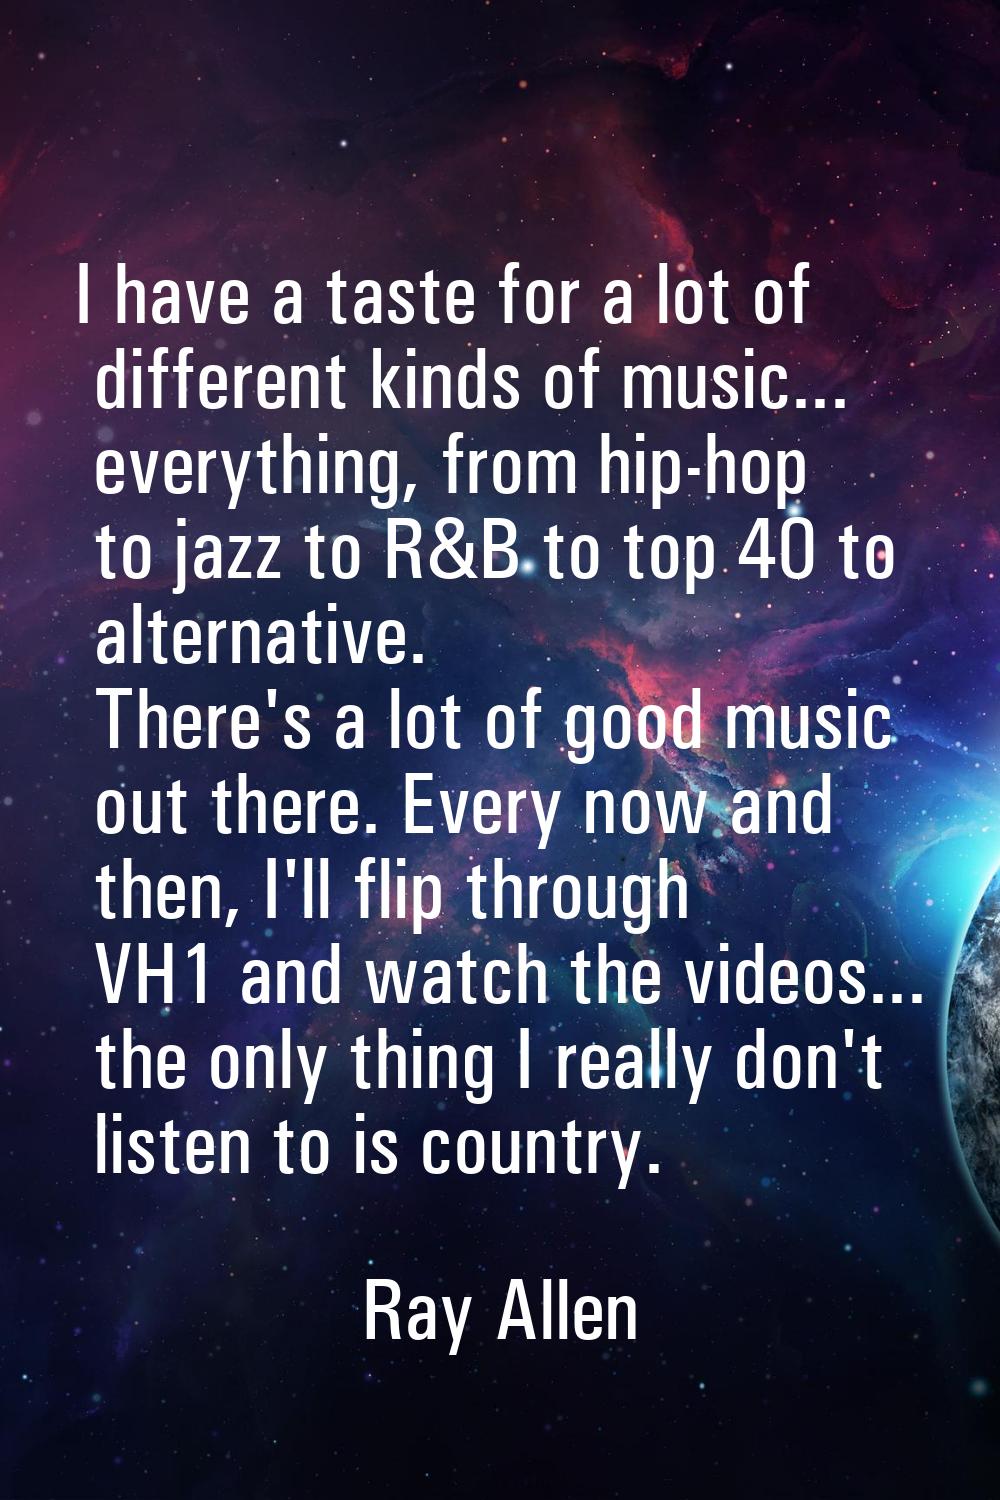 I have a taste for a lot of different kinds of music... everything, from hip-hop to jazz to R&B to 